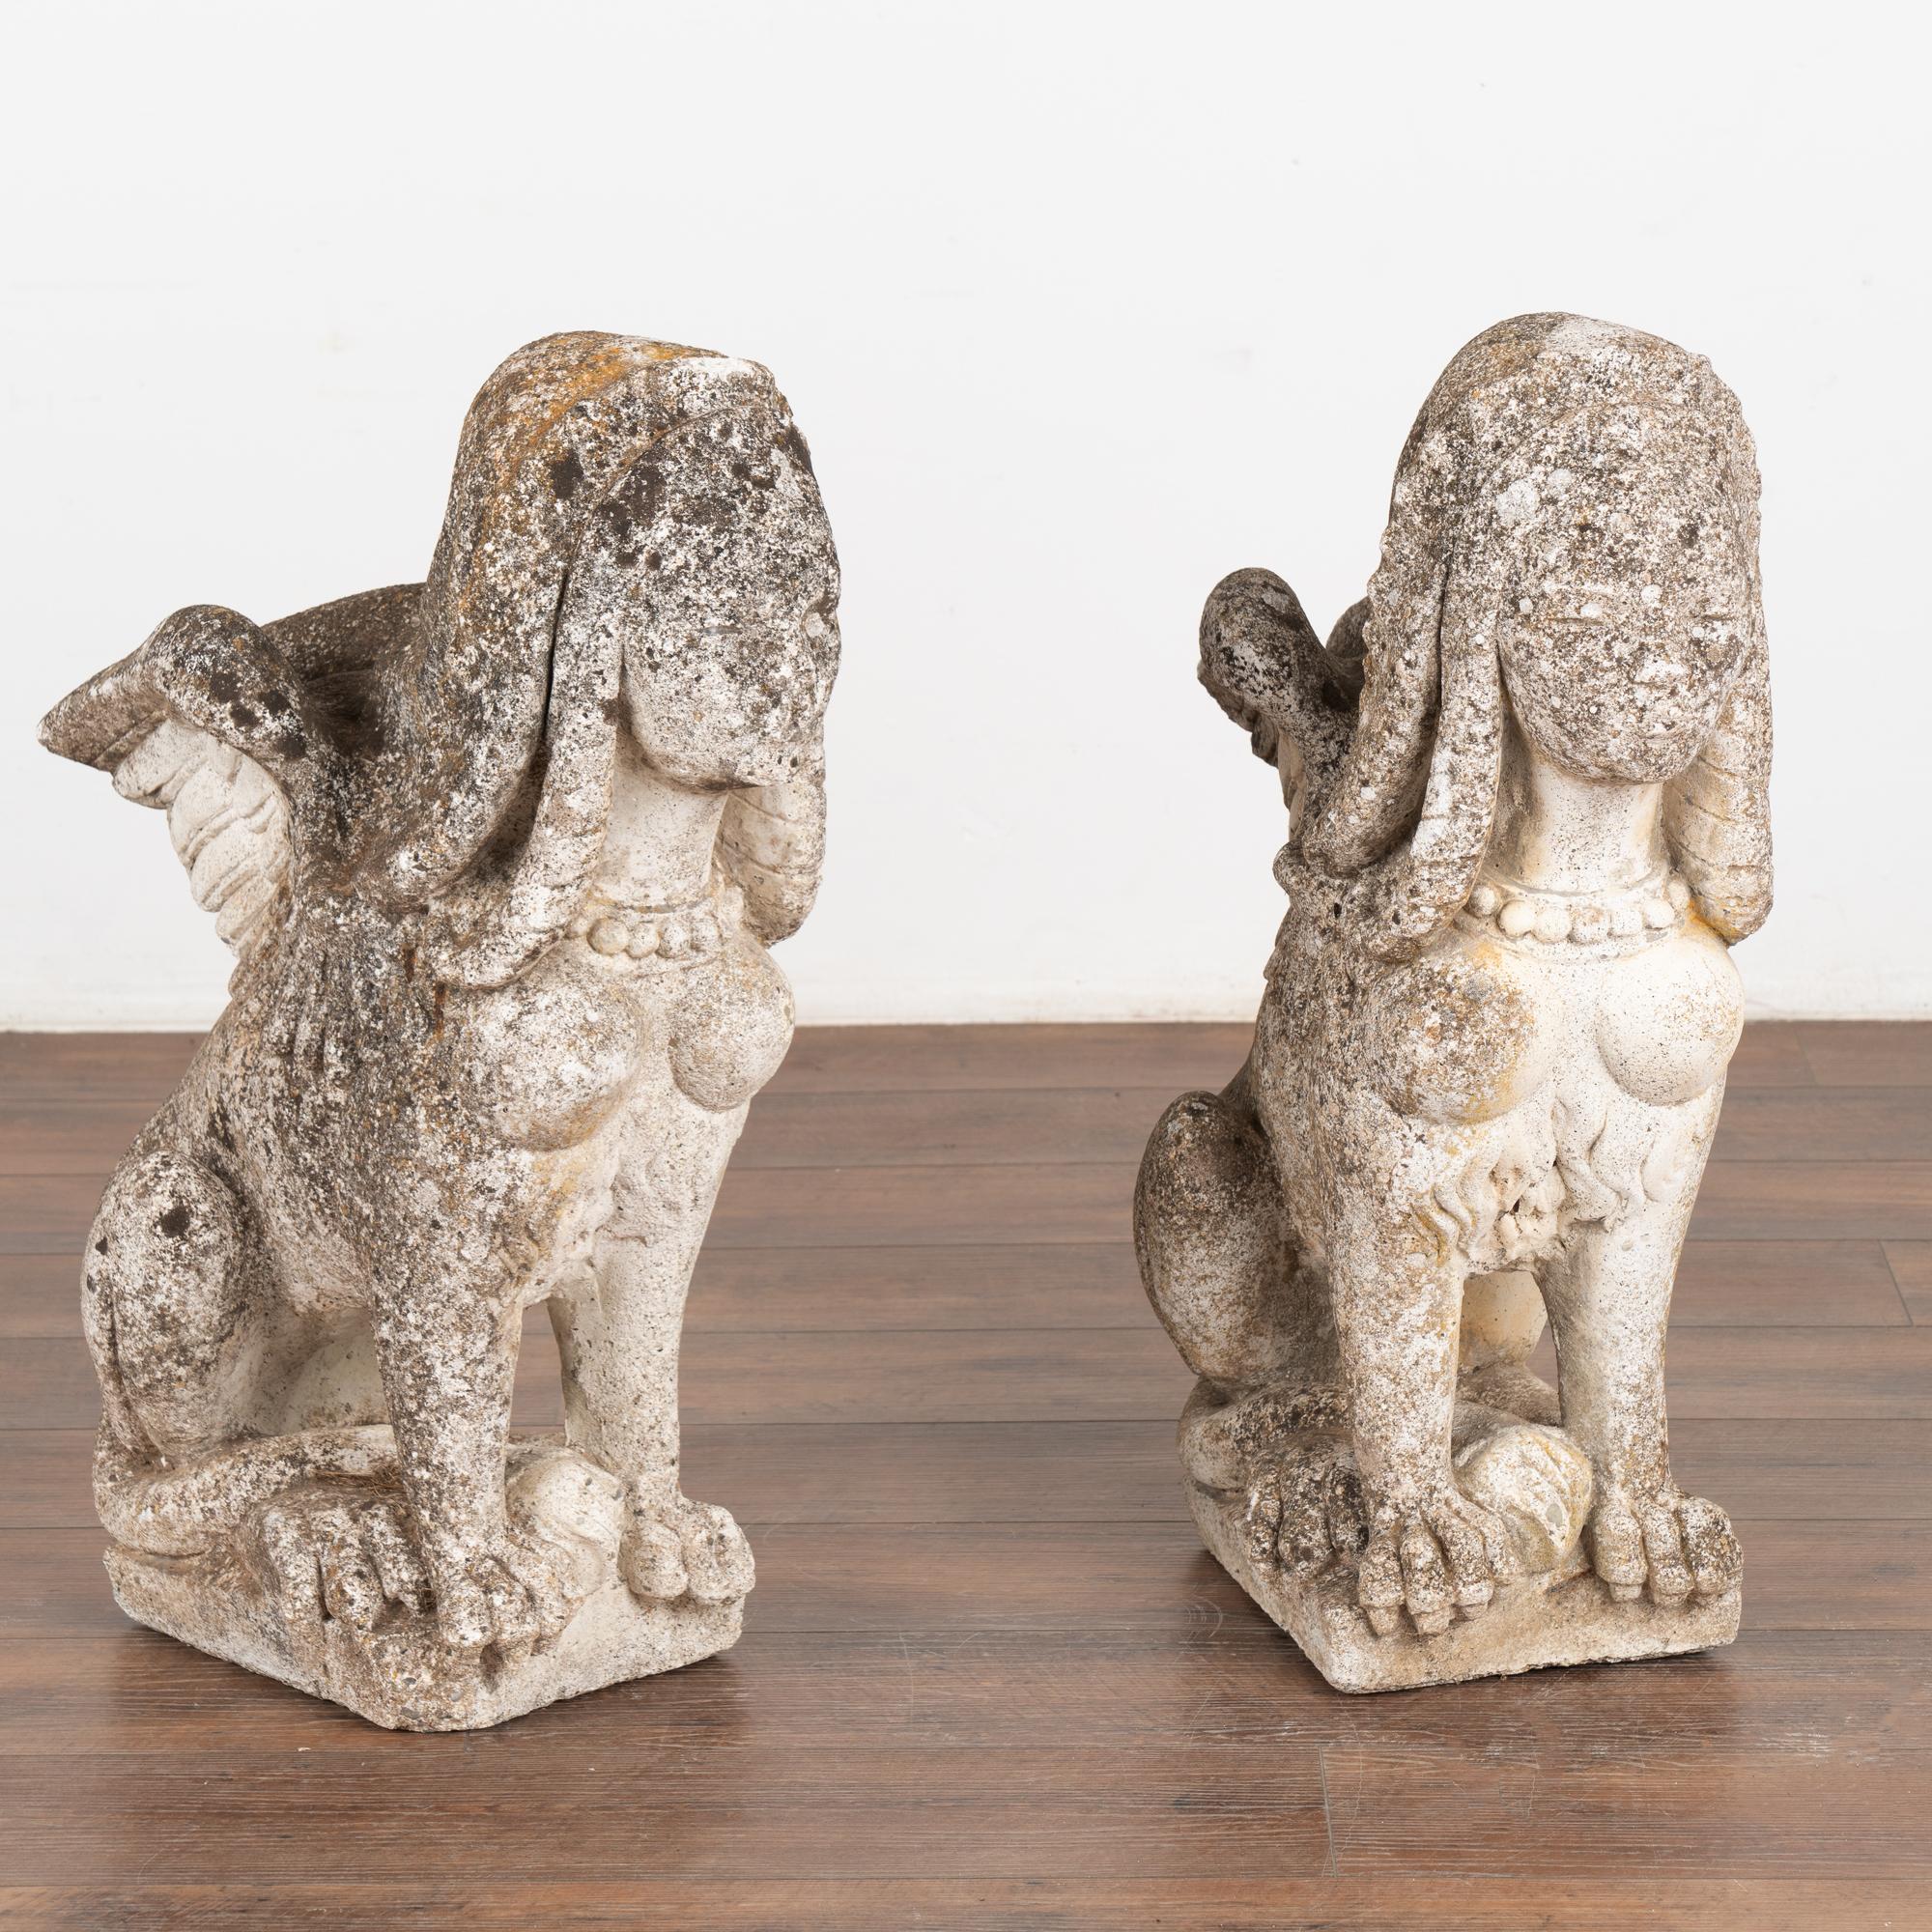 Pair of Egyptian sphinx carved limestone statues that embody a rich history and timeless charm each with the head of a human, body of a lion and wings of an eagle. The worn patina reflects years of exposure outside in the elements, leaving an aged